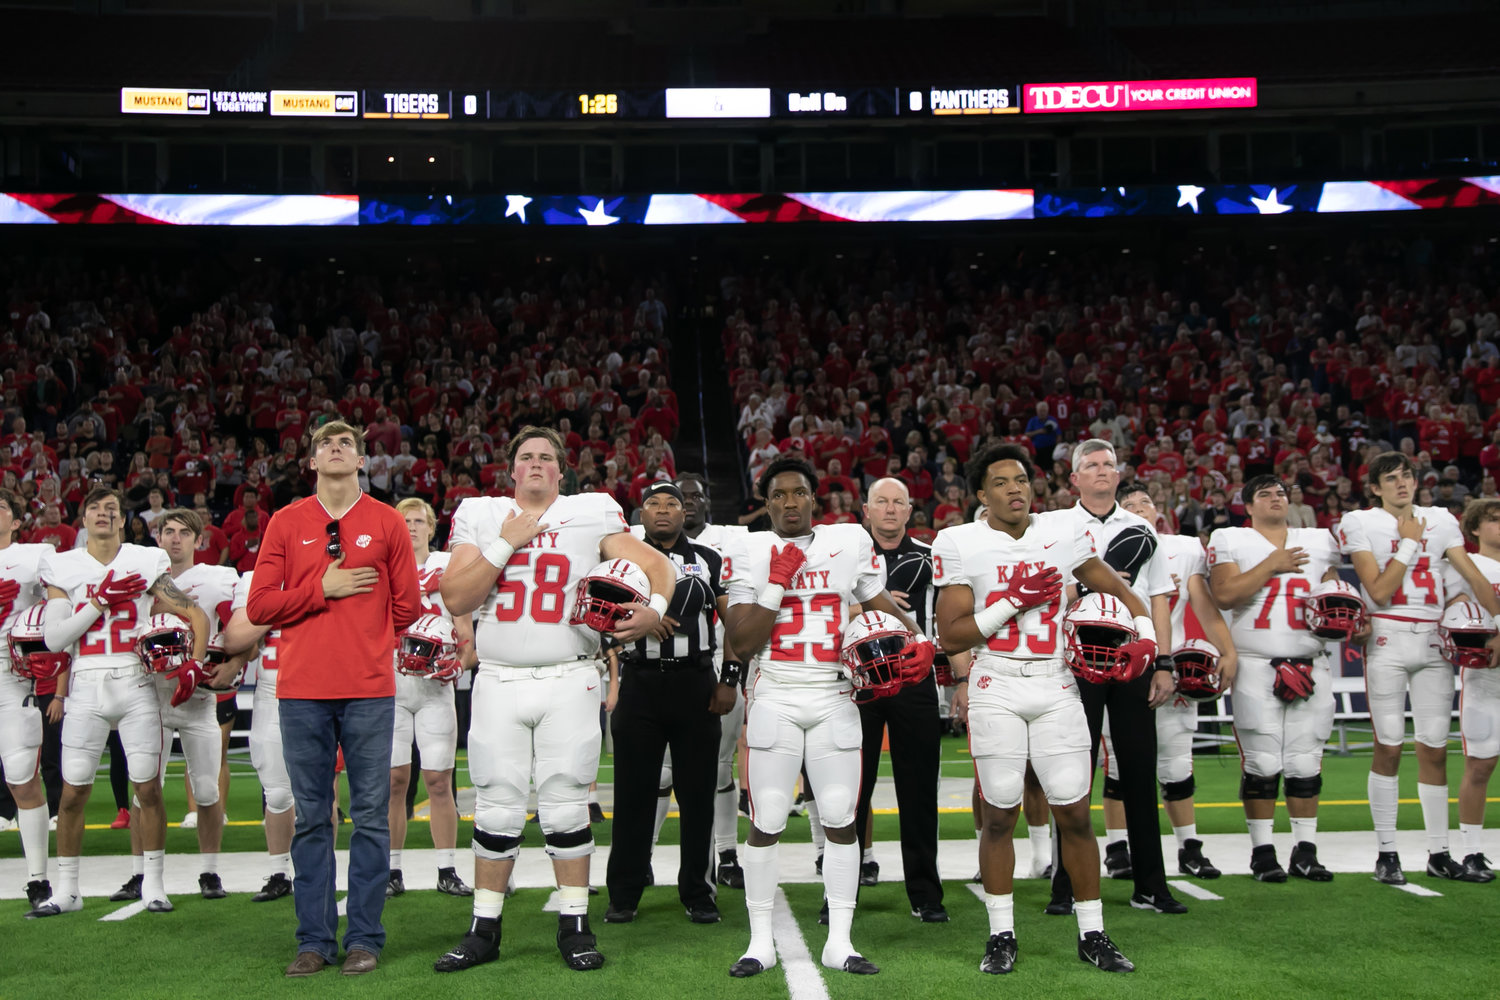 The Katy team captains stand for the national anthem before Friday's Class 6A-Division II Region III Final between Katy and C.E. King at NRG Stadium.